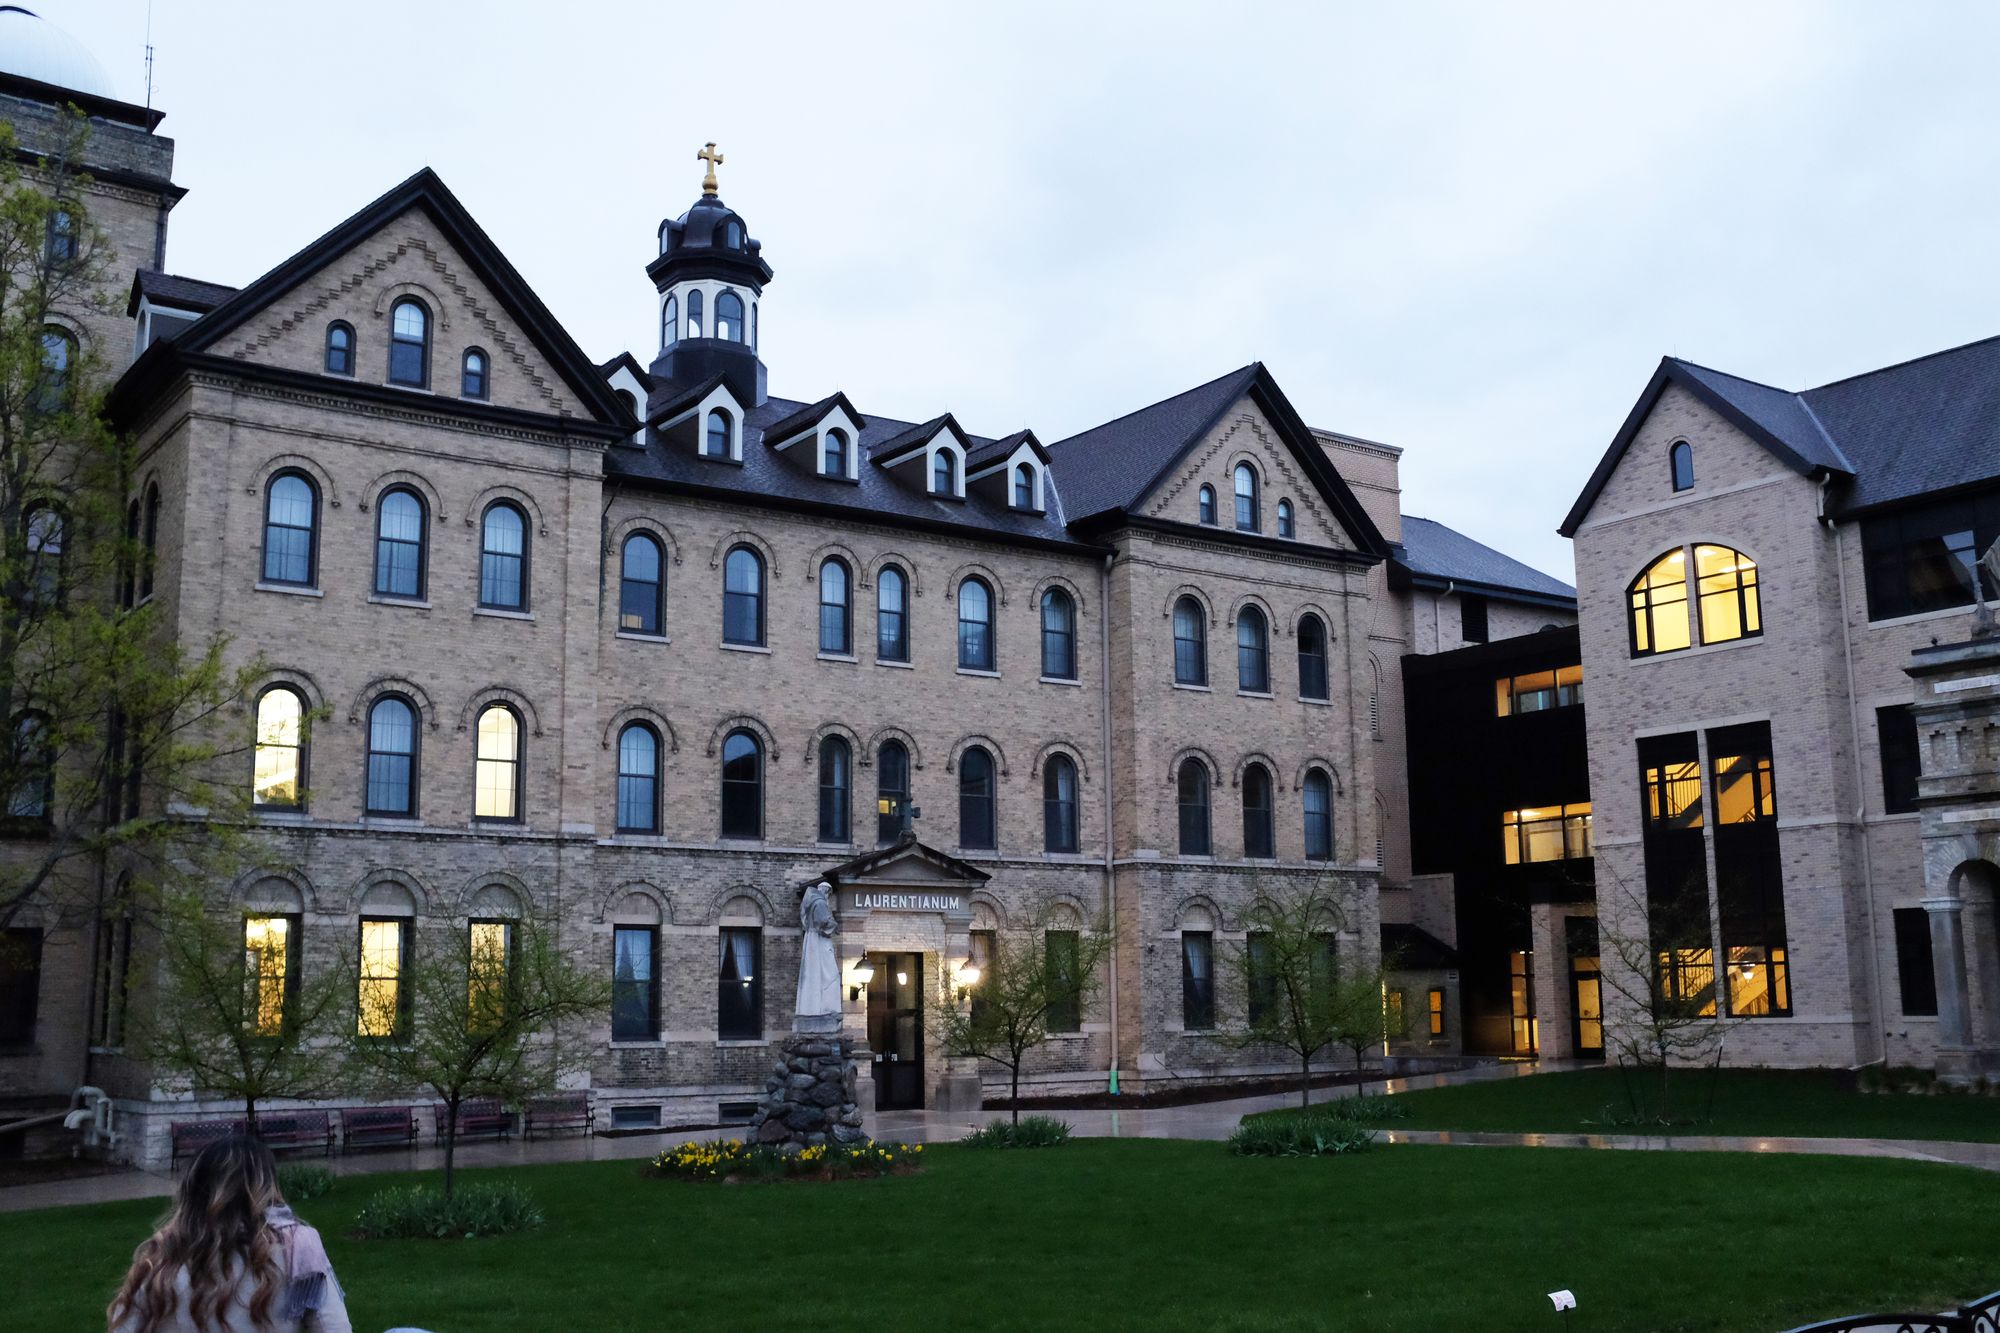 Photograph of the exterior of the the Laurentianum at St. Lawrence Seminary at dusk.